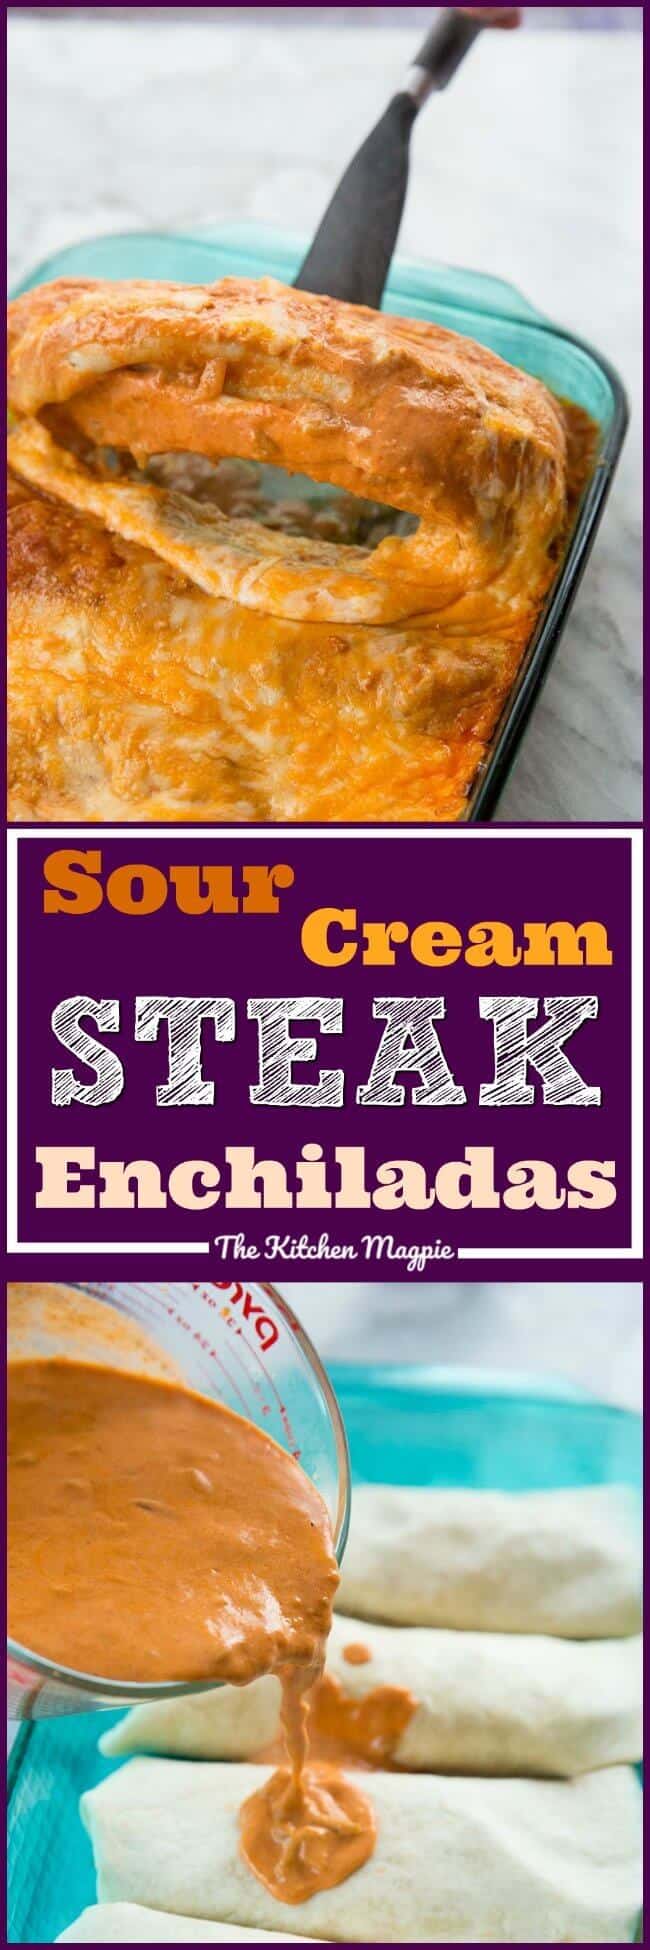 These Steak Sour Cream Enchiladas are the easiest dinner ever! The whole family is going to love them! #enchiladas #steak #recipe